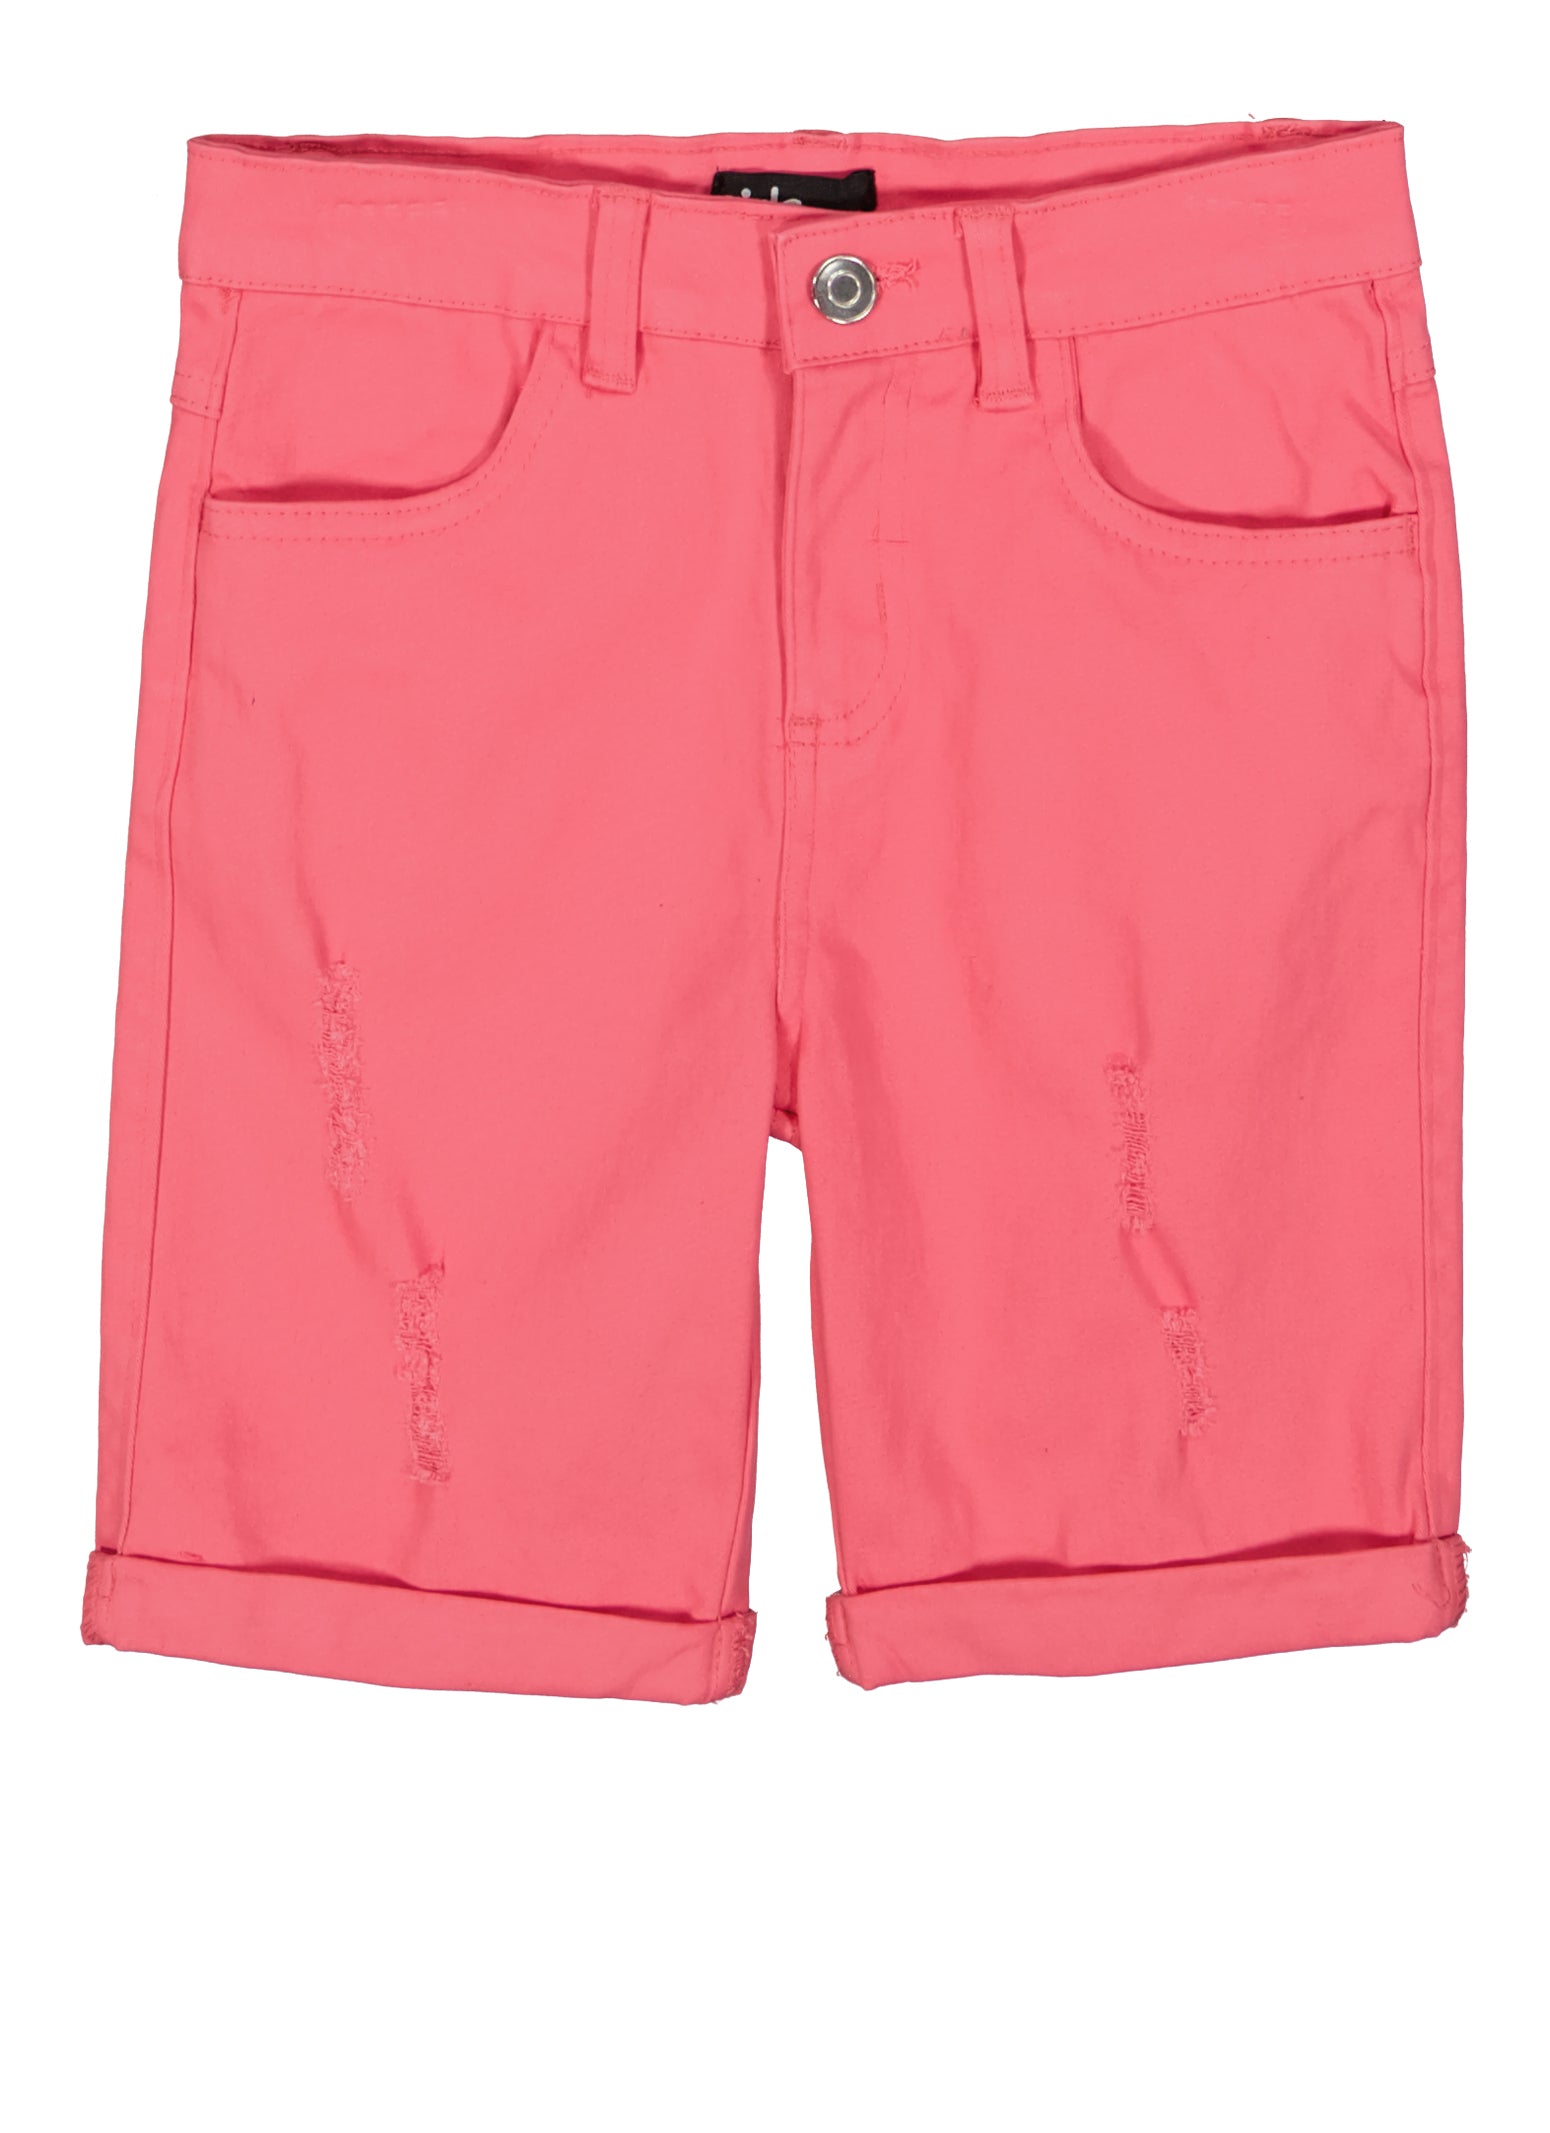 Girls Hyperstretch Distressed Rolled Cuff Shorts